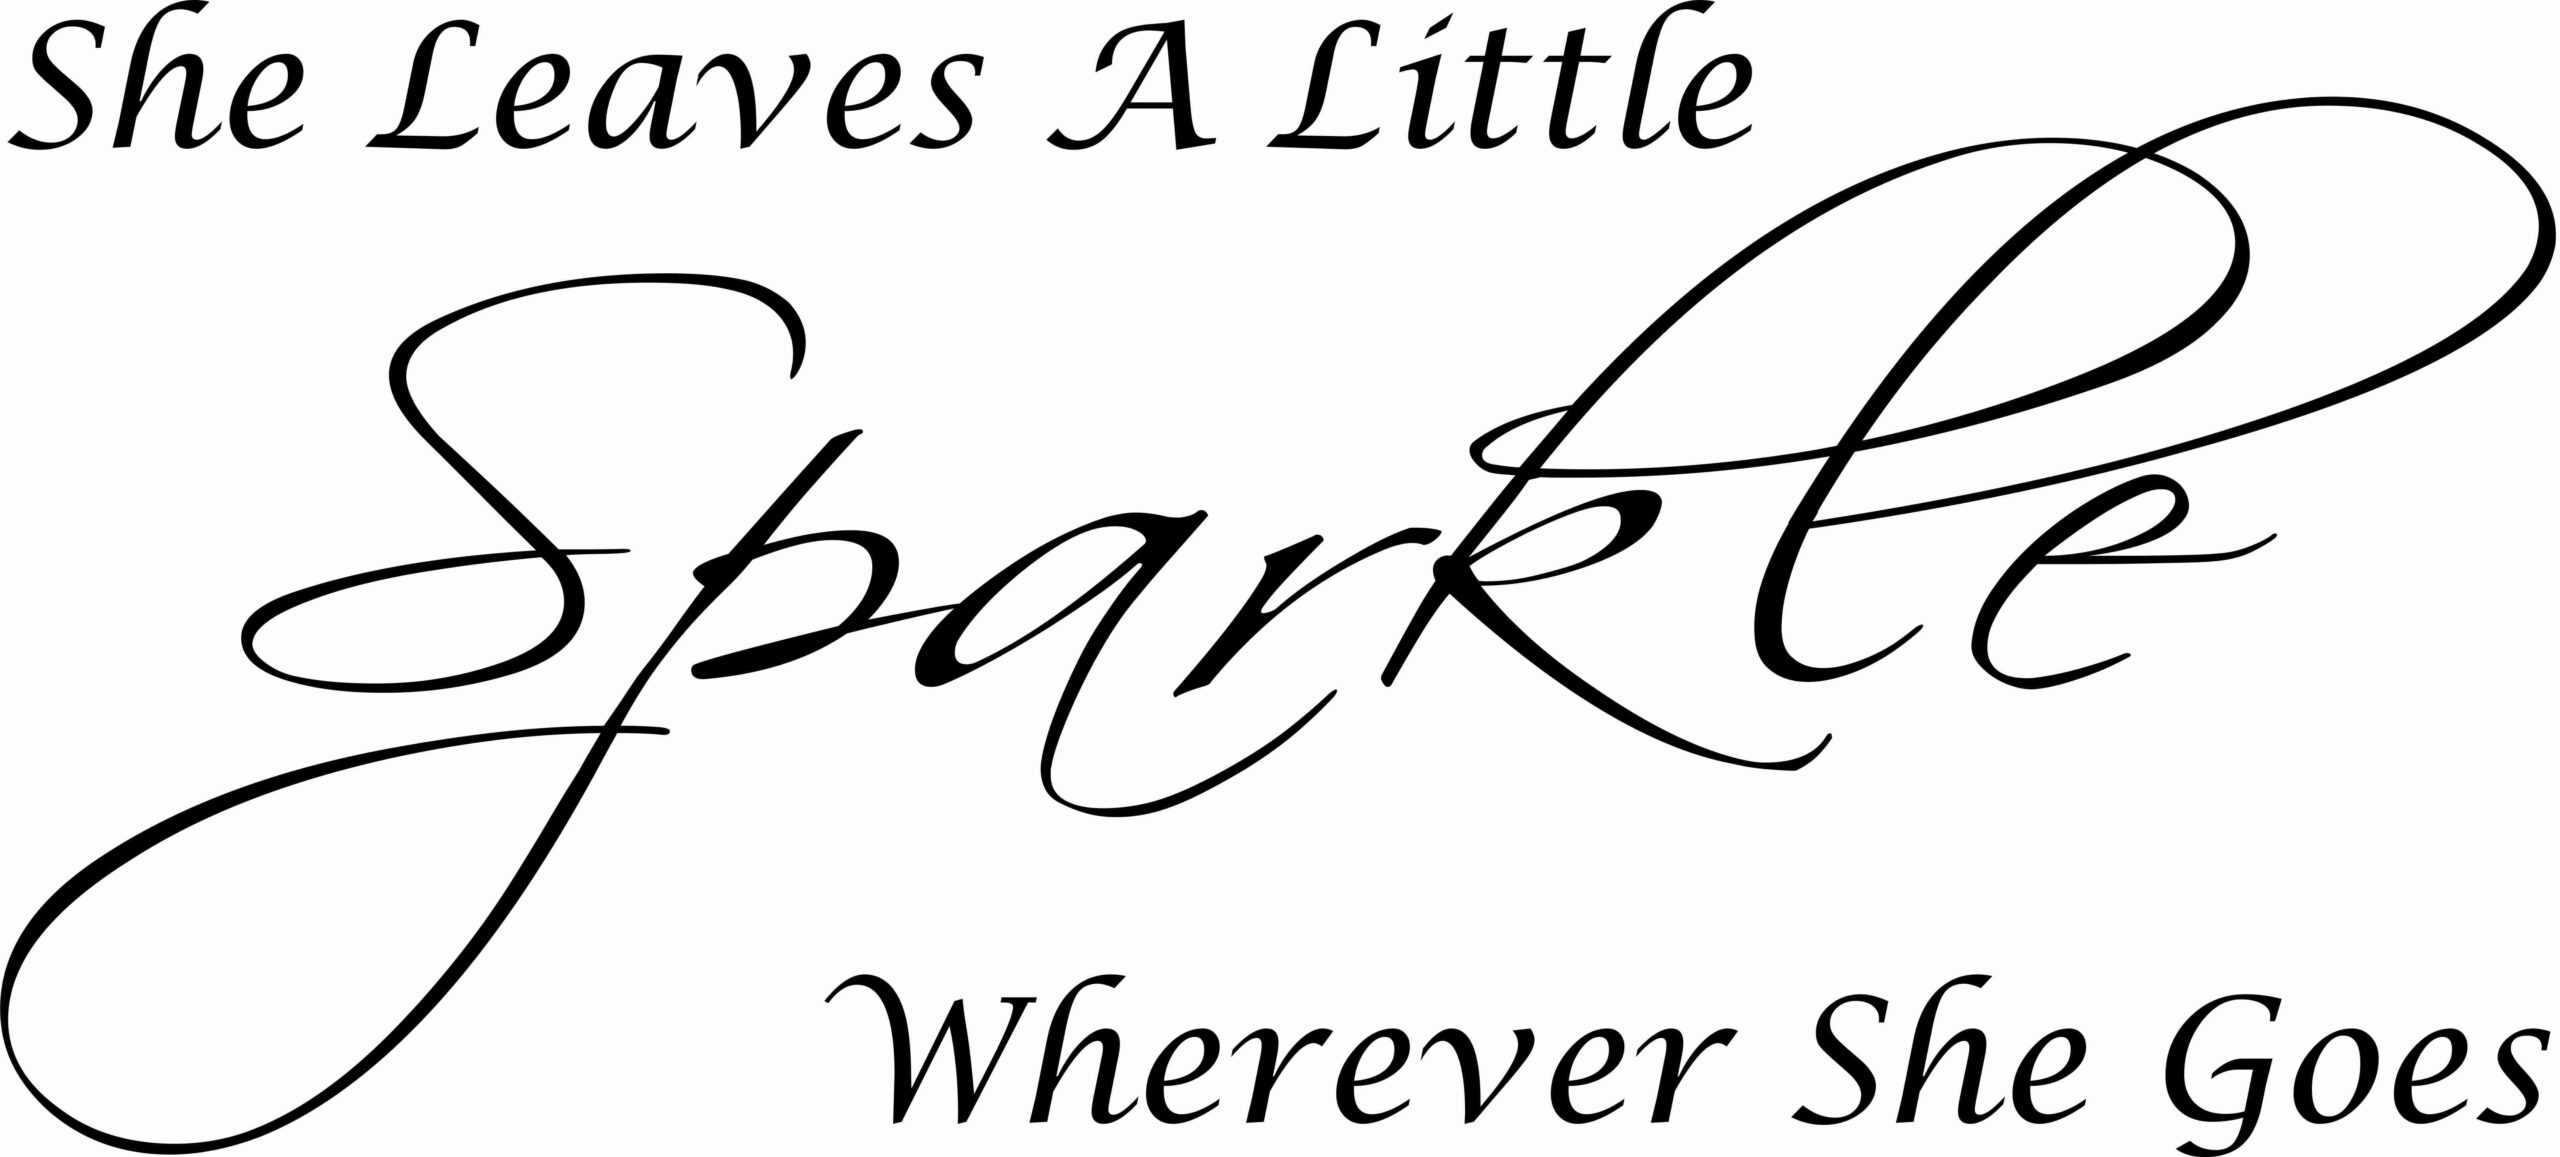 She Leaves A Little Sparkle Wherever She Goes Vinyl Wall Decal 